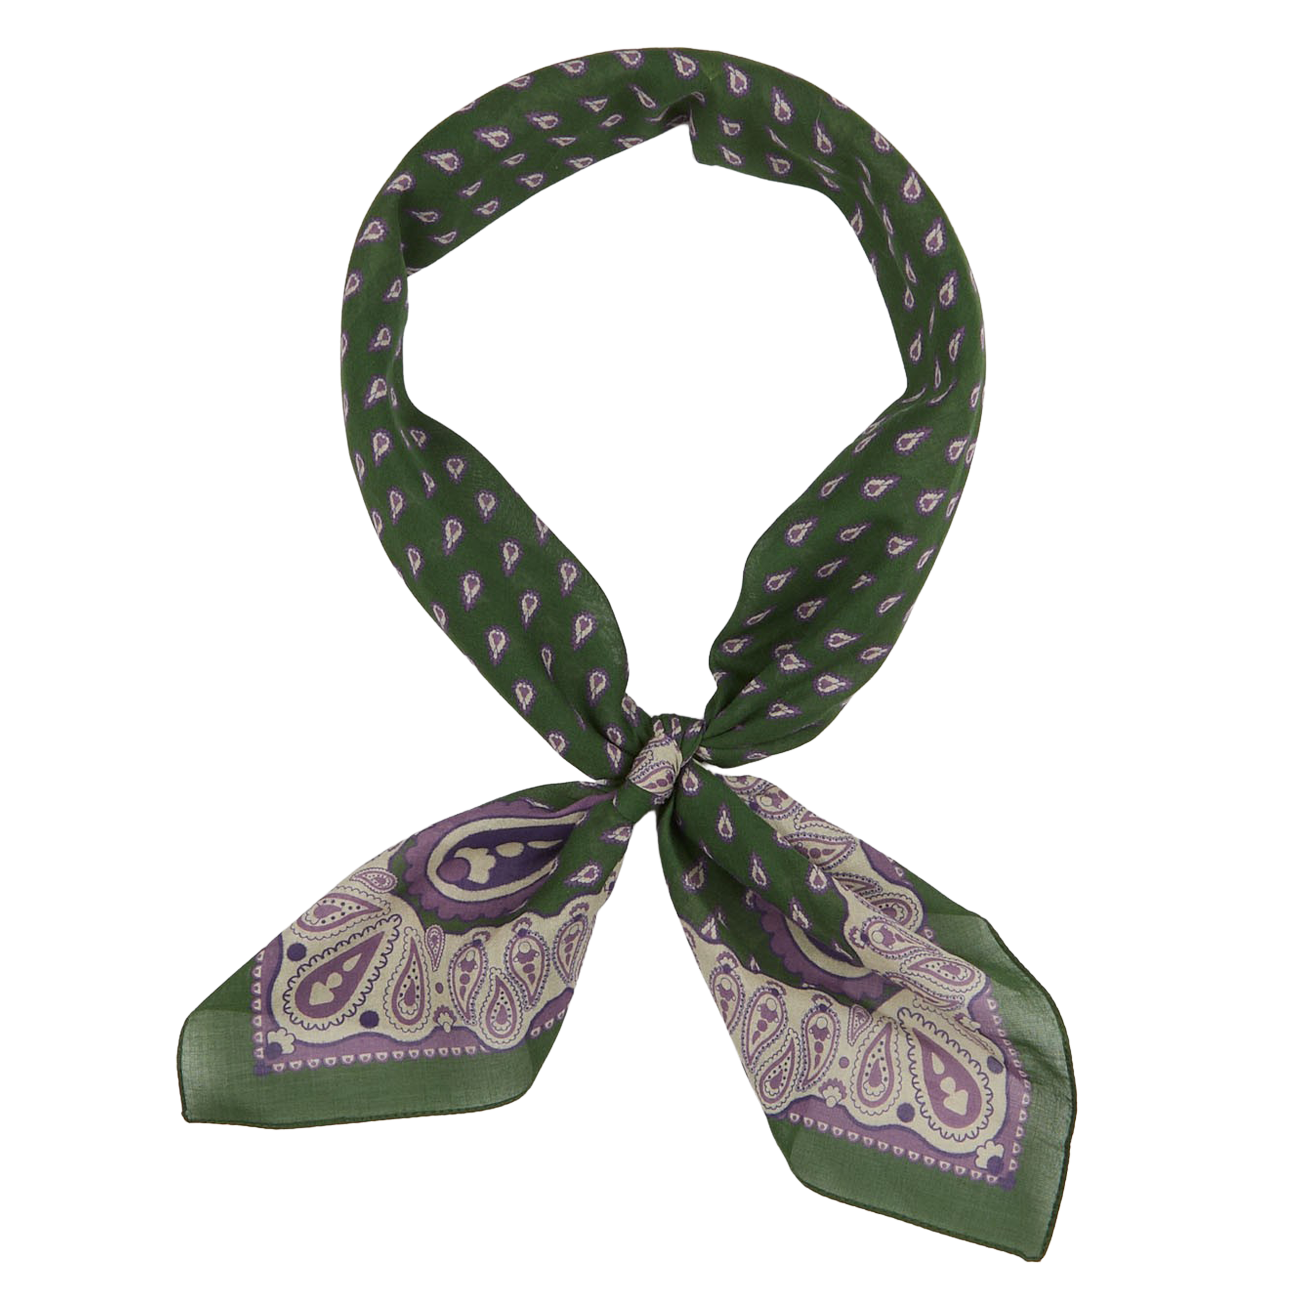 Pine Green Paisley Cotton Voile Bandana by De Bonne Facture neatly tied in a knot on a white background.